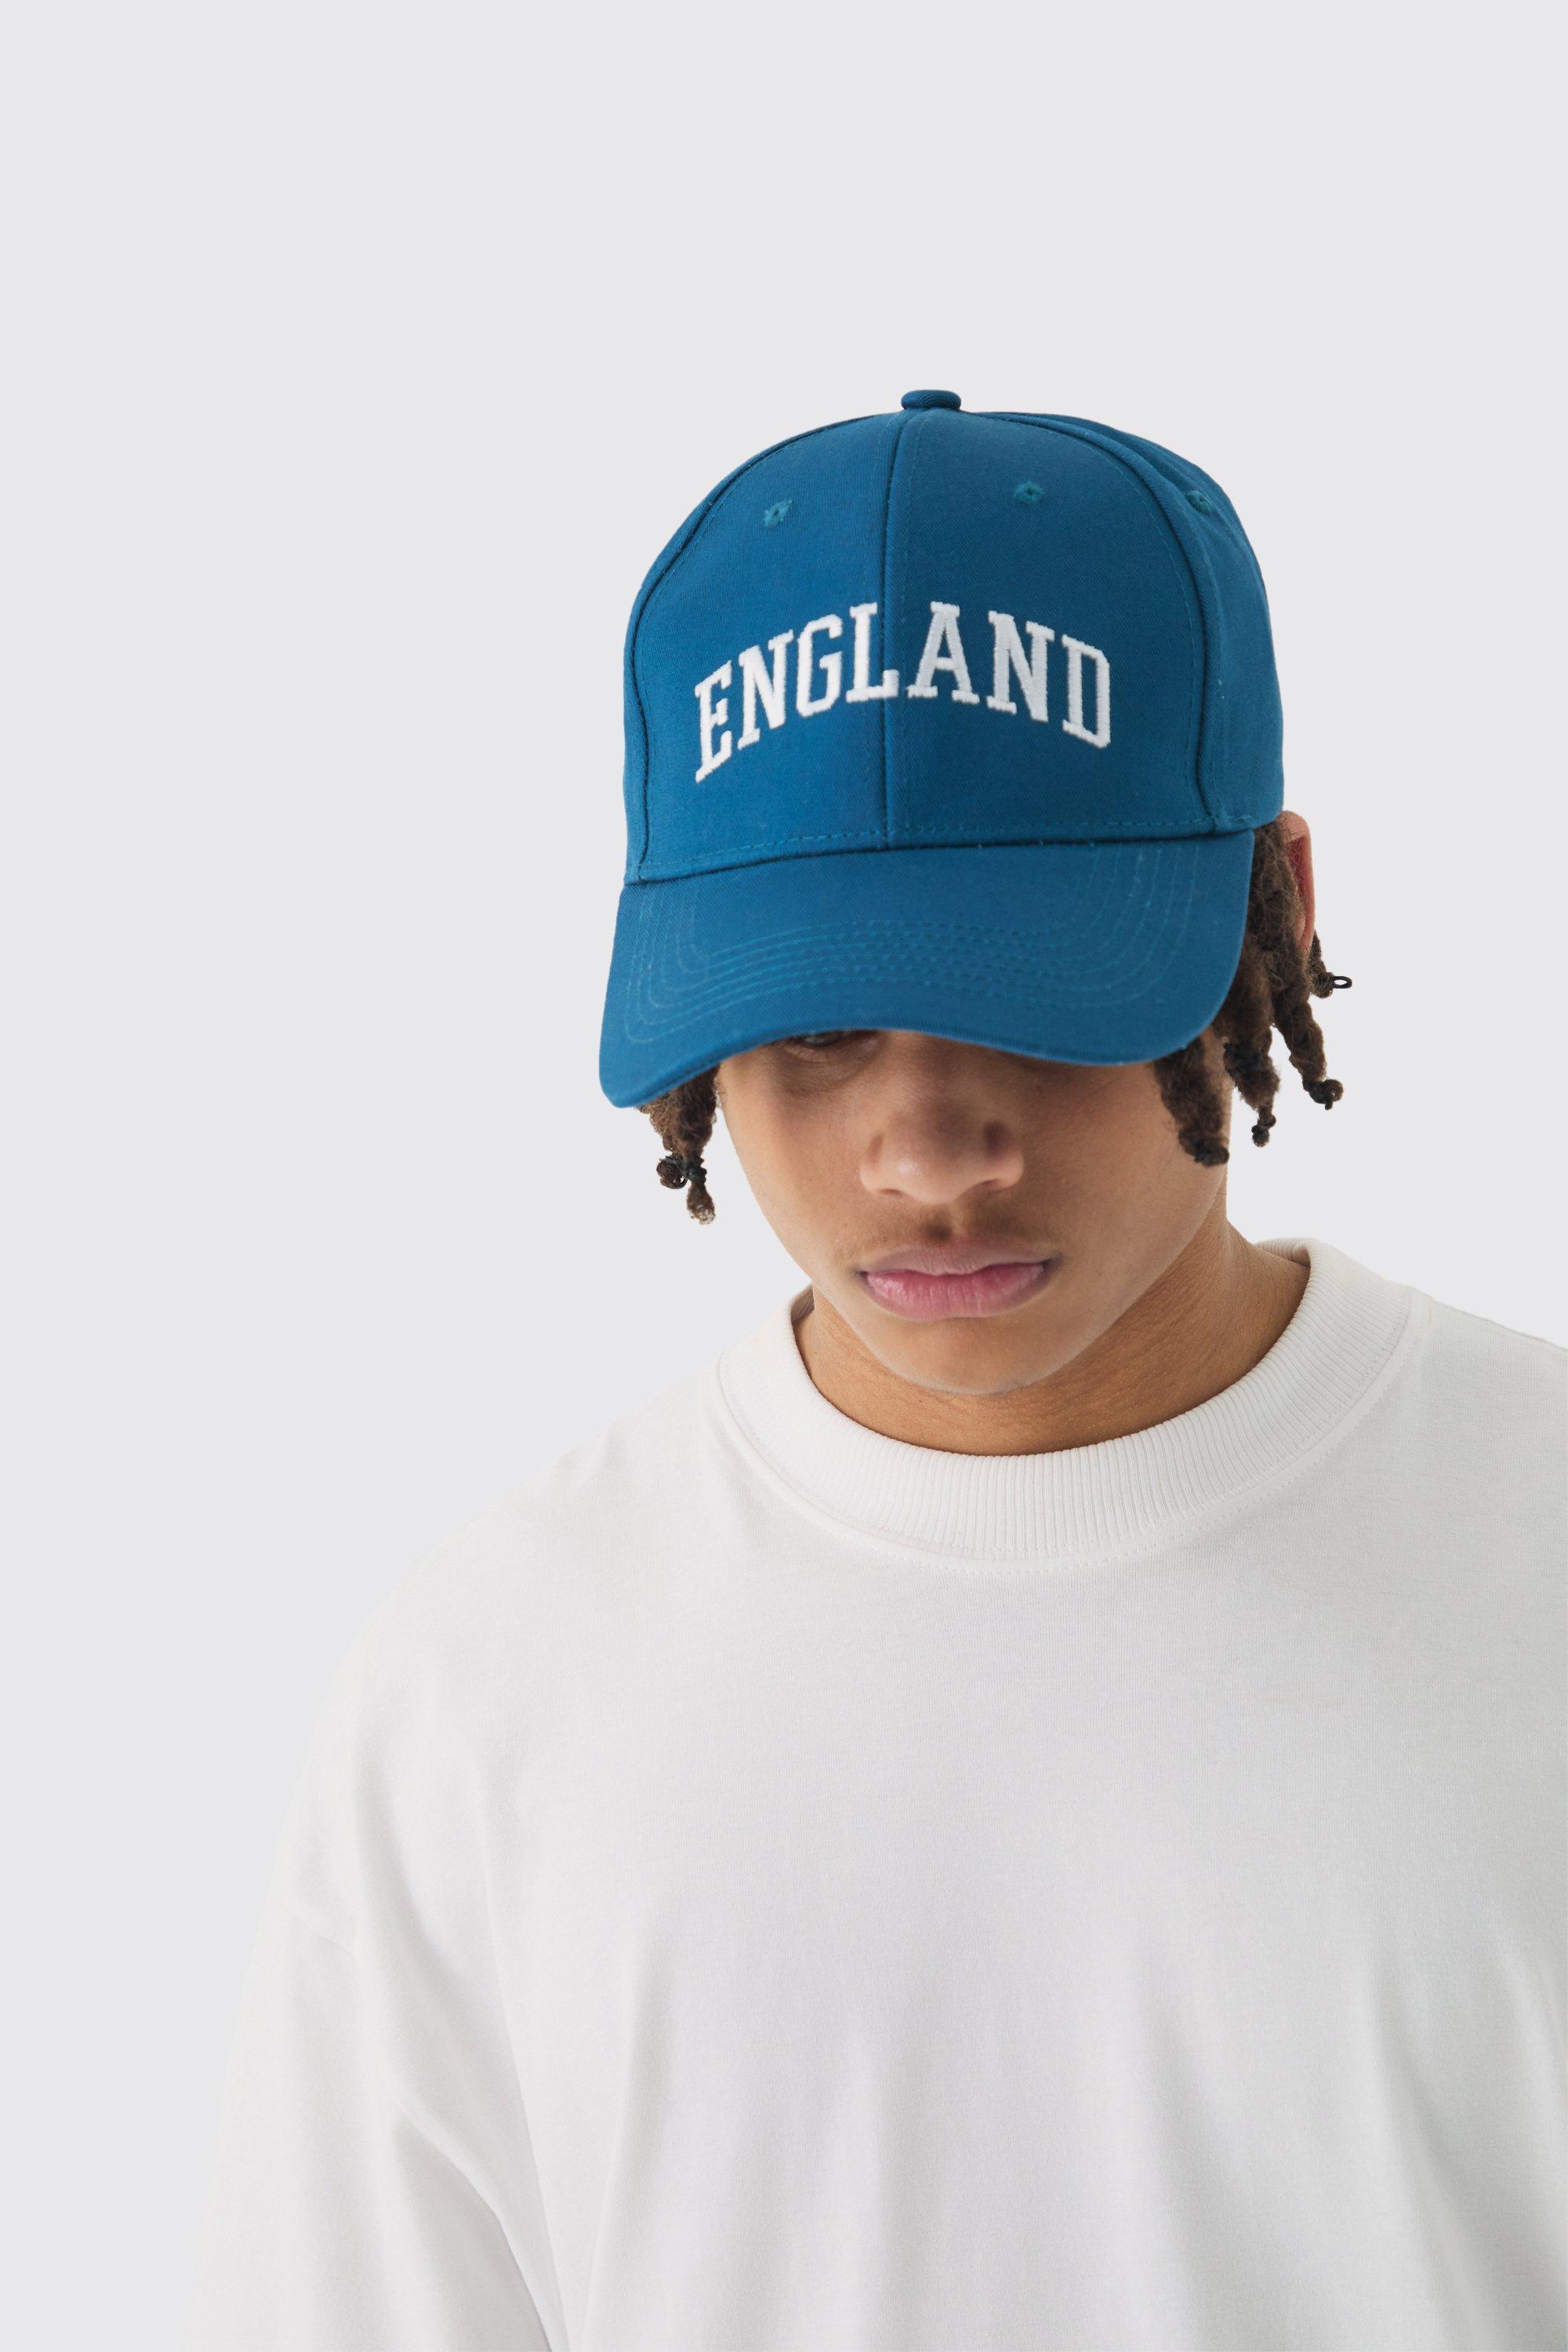 Boohoo England Embroidered Cap In Blue, Blue